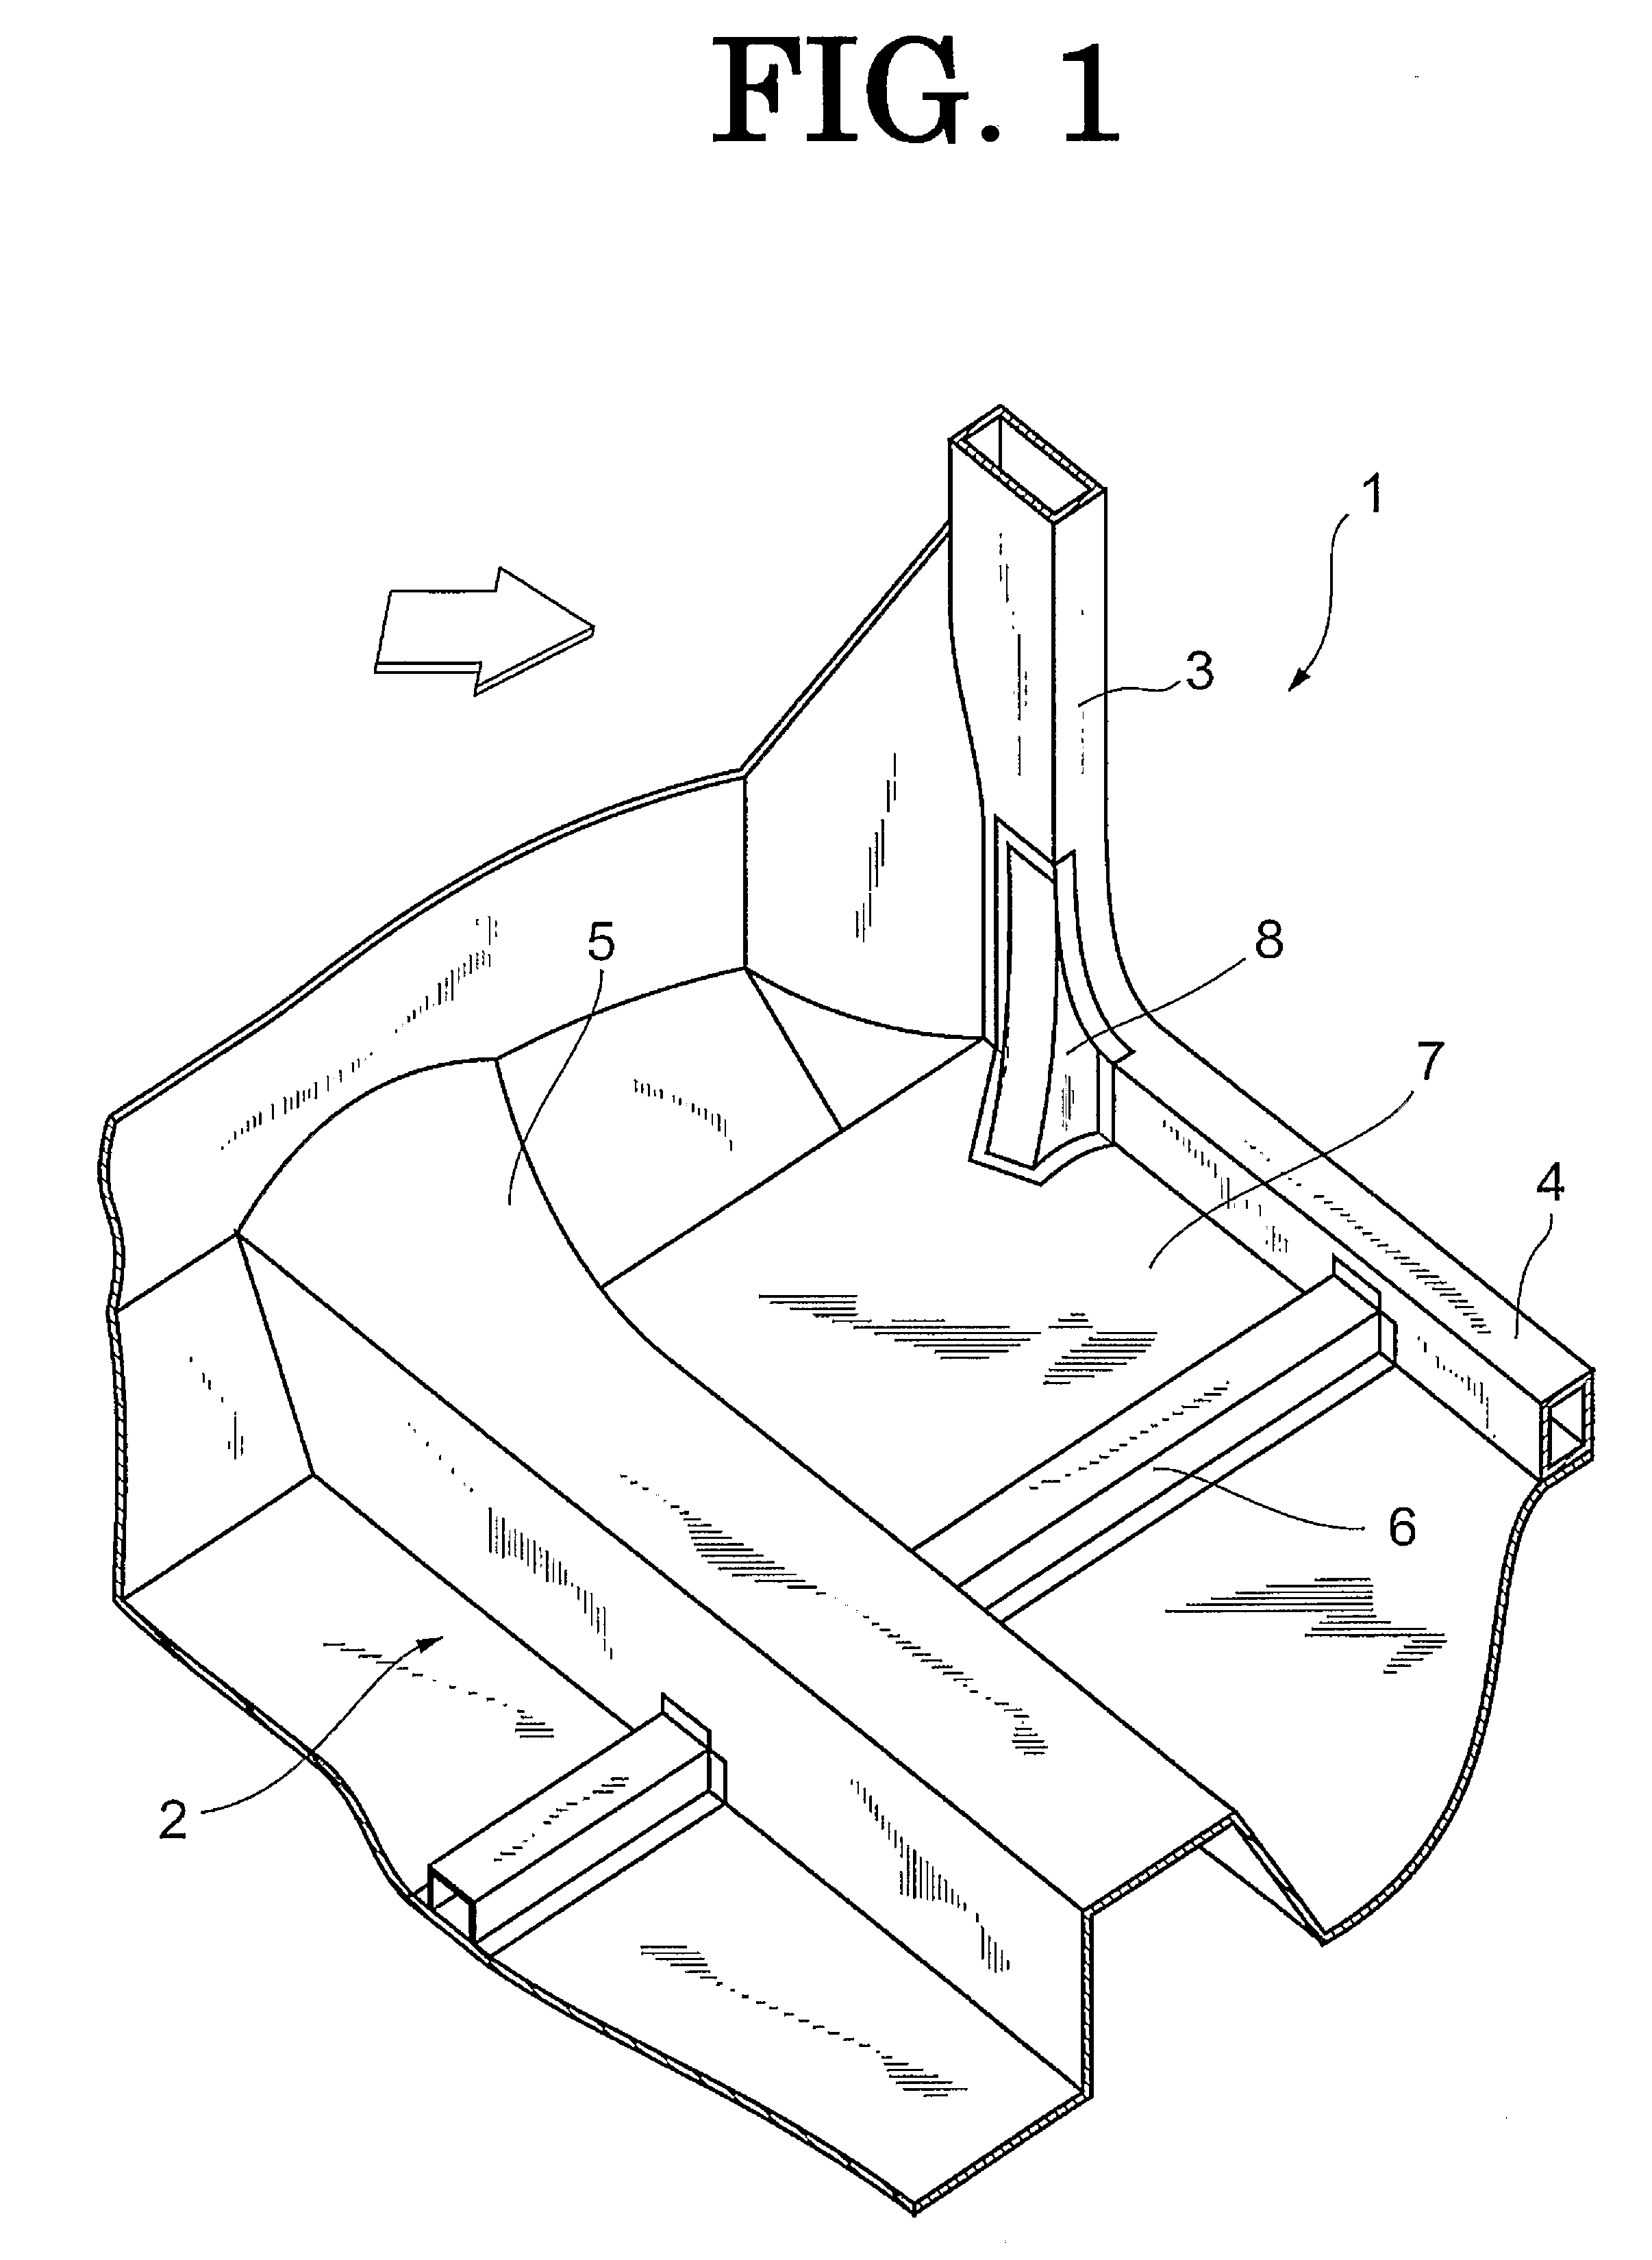 Vehicle lower body structure